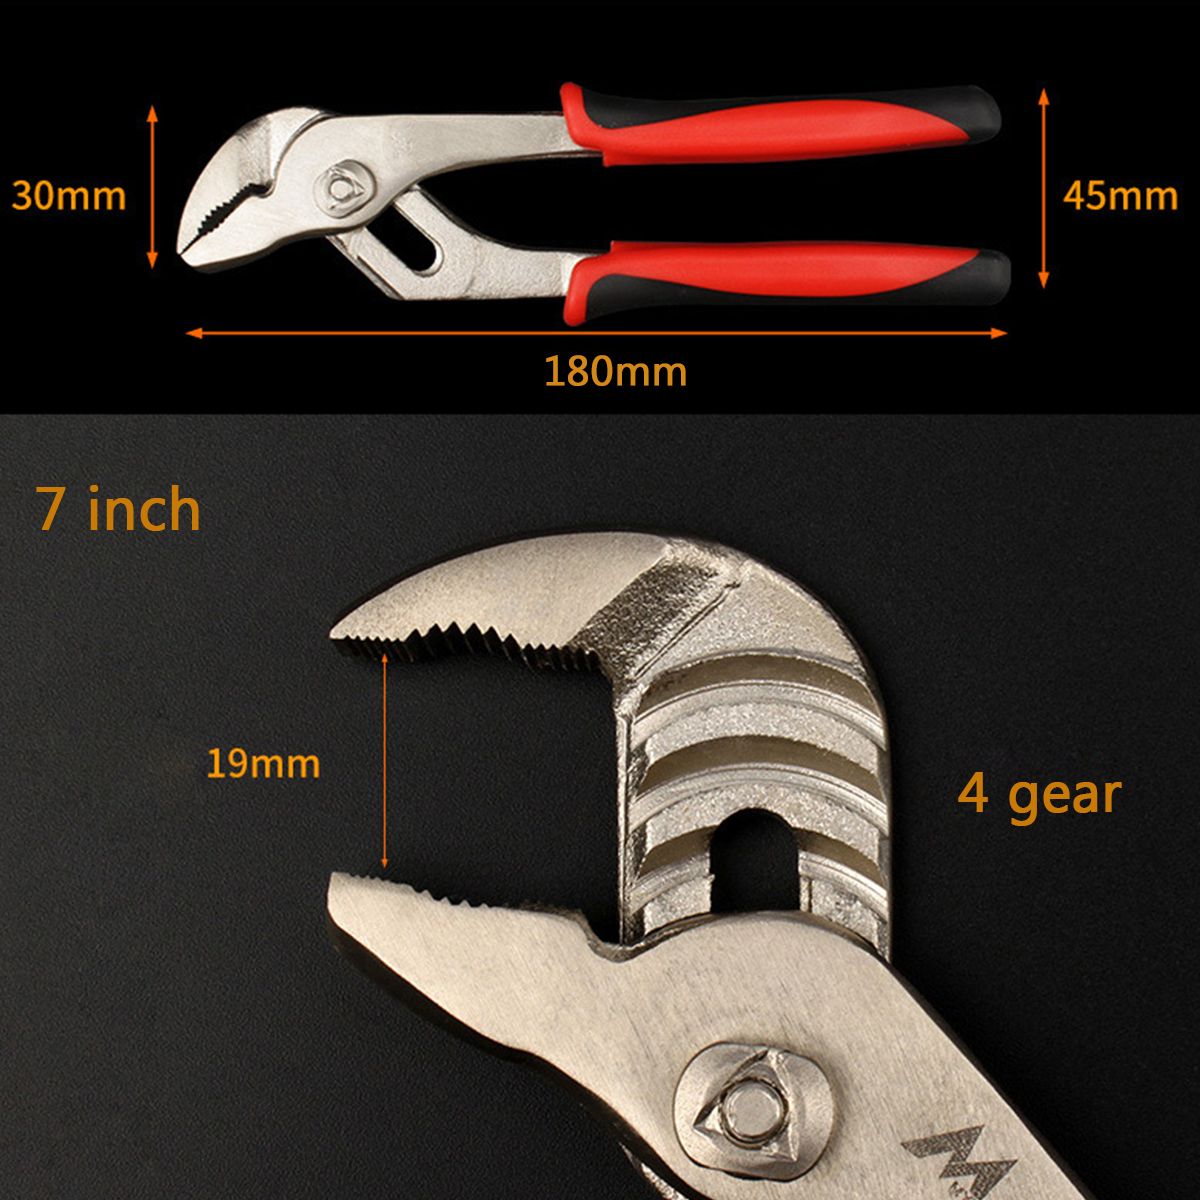 781012-Inch-Water-Pump-Pliers-Plumbers-Jaw-Pipe-Clamp-Wrench-Grips-Hand-Tool-1447009